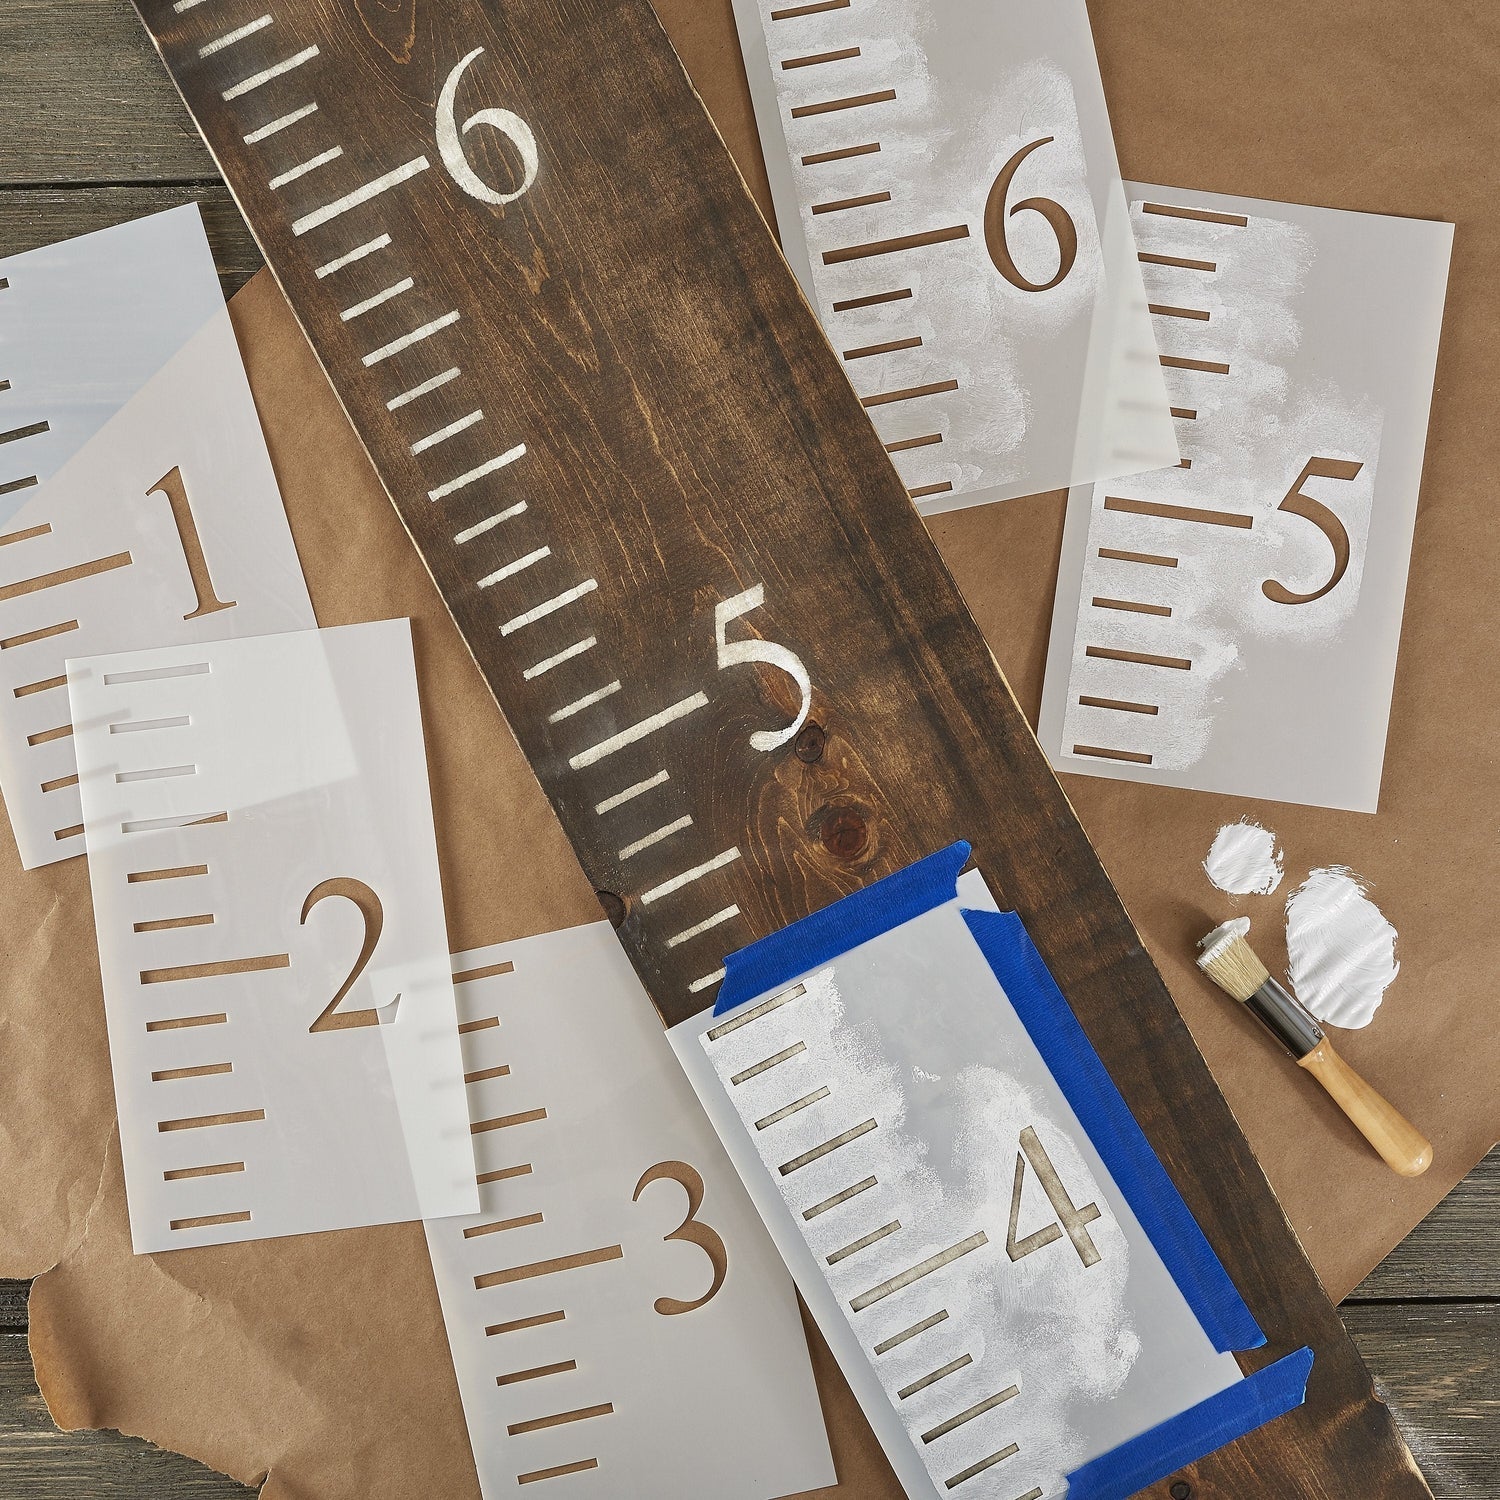 growth chart template